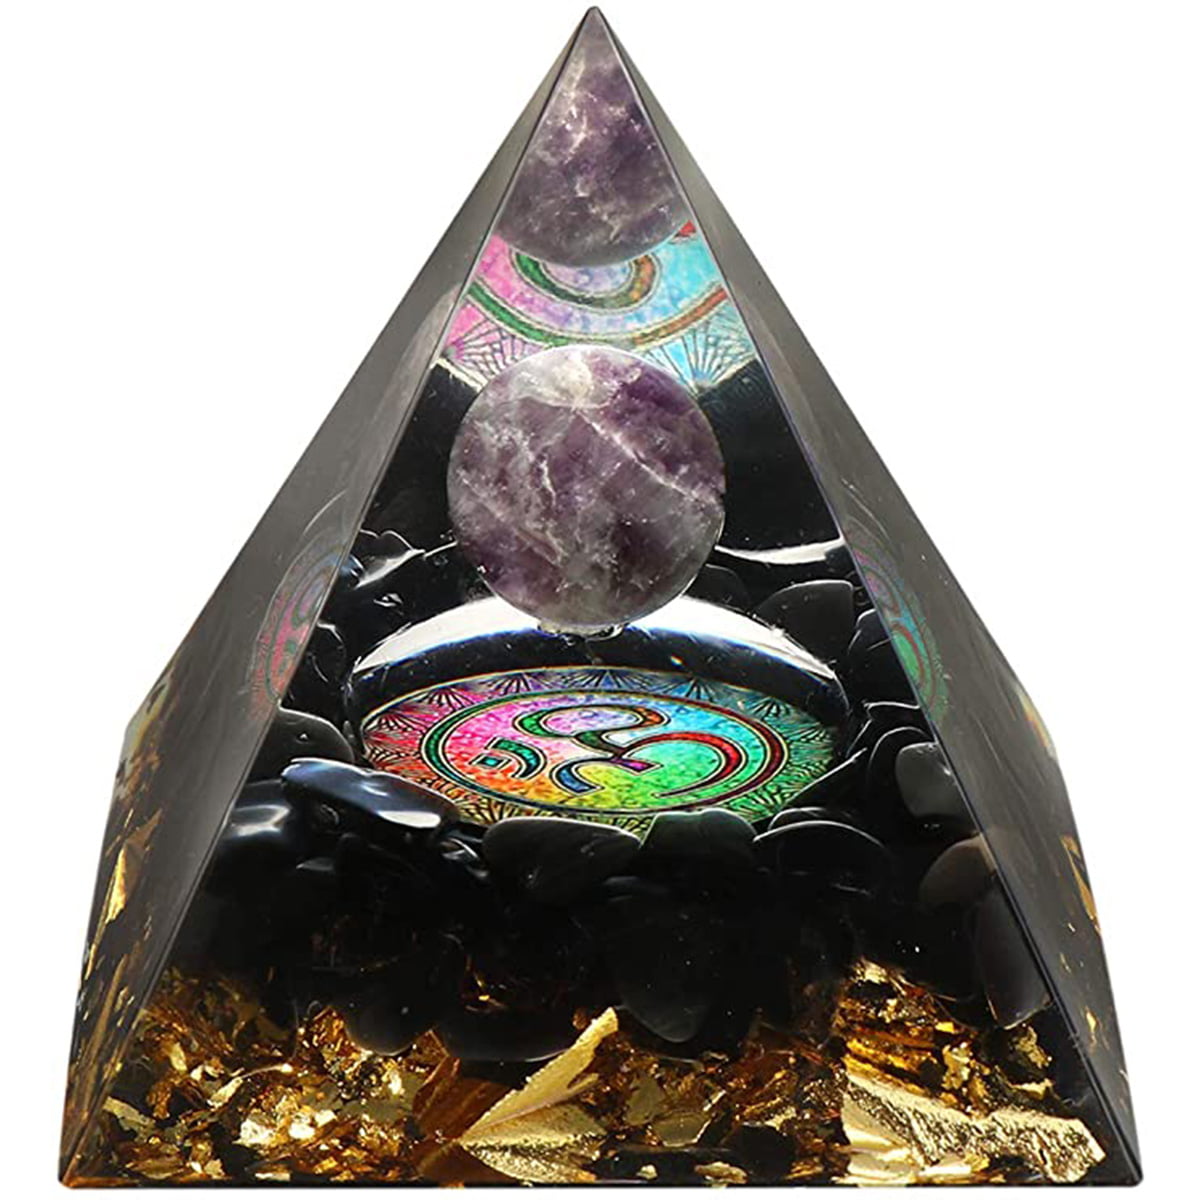 Aatm Energy Generator Clear Crystal Orgone Pyramid for EMF Protection Chakra Healing Meditation with Copper 1 and 1 Inches